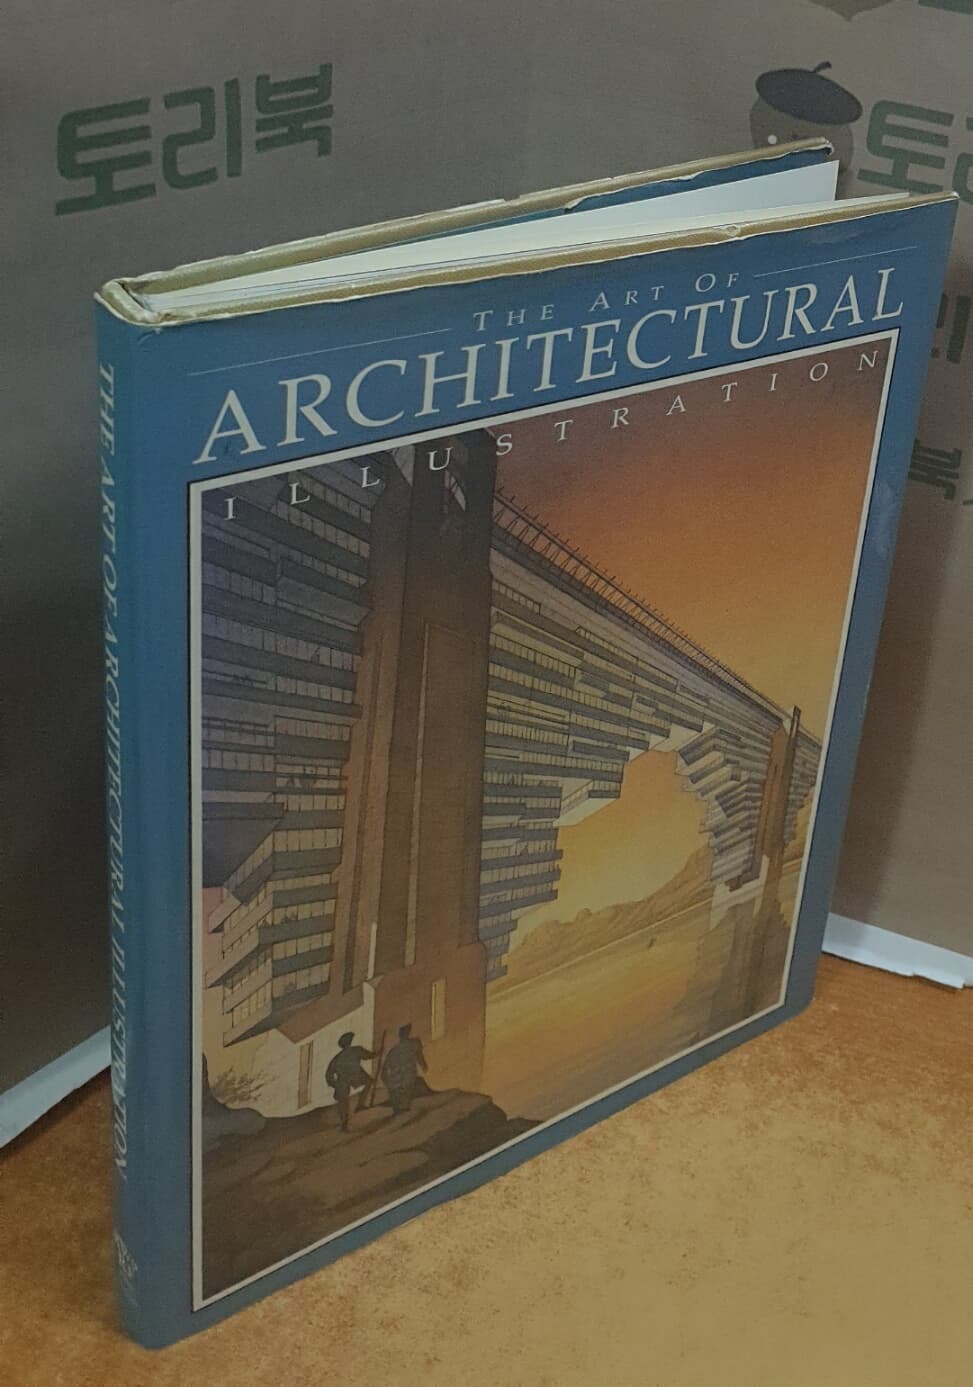 The Art of Architectural Illustration